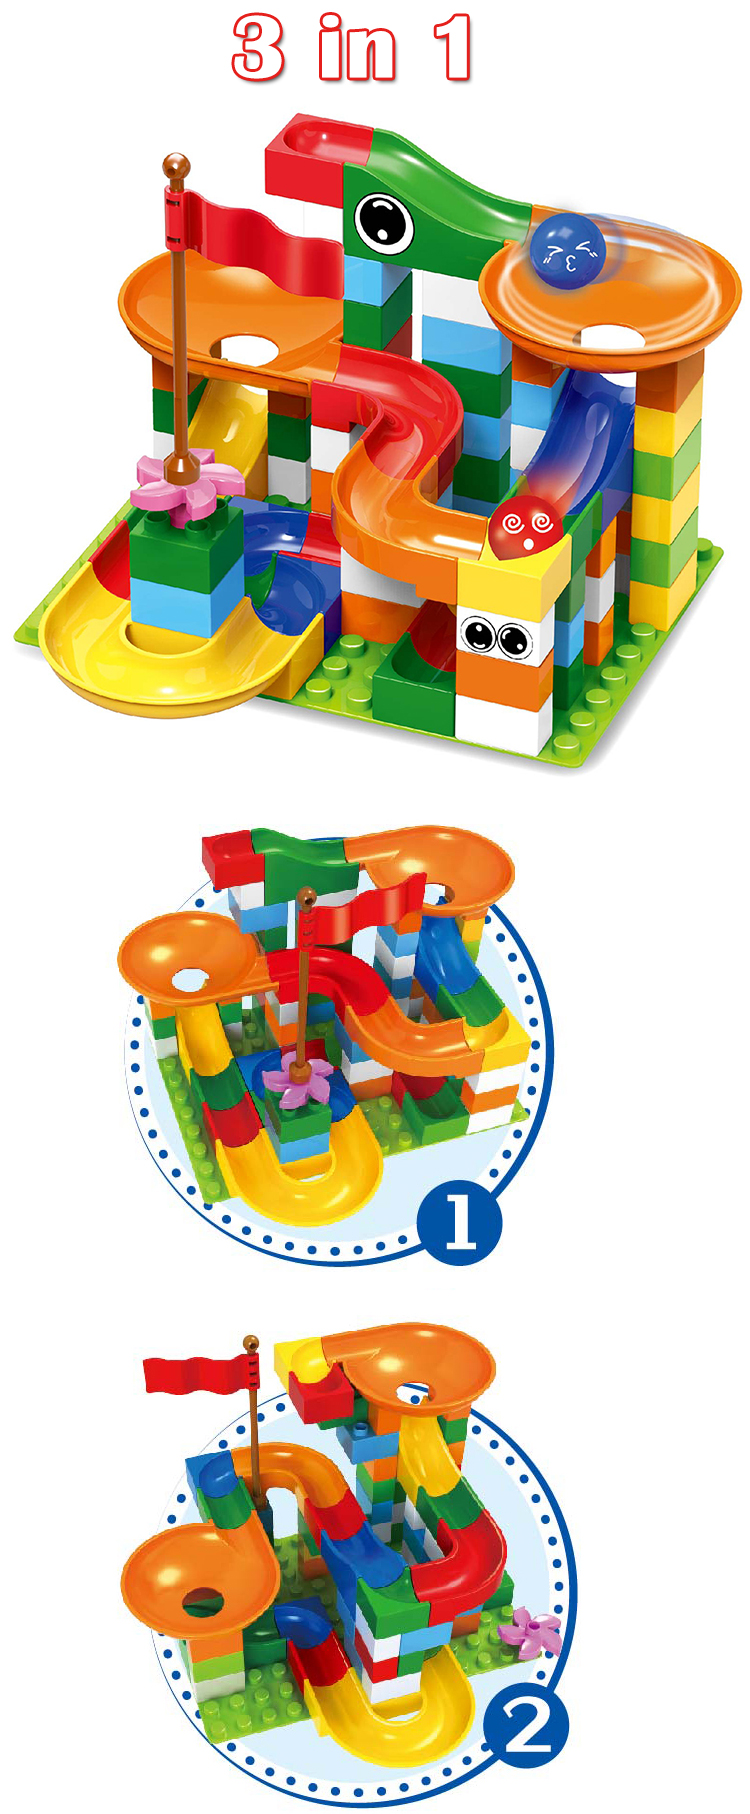 WOMA TOYS 3 in 1 Ball Track Ball Slide With Base Plates Big Building Block Bricks 3 Year Old For Preschool Kids Brinquedo